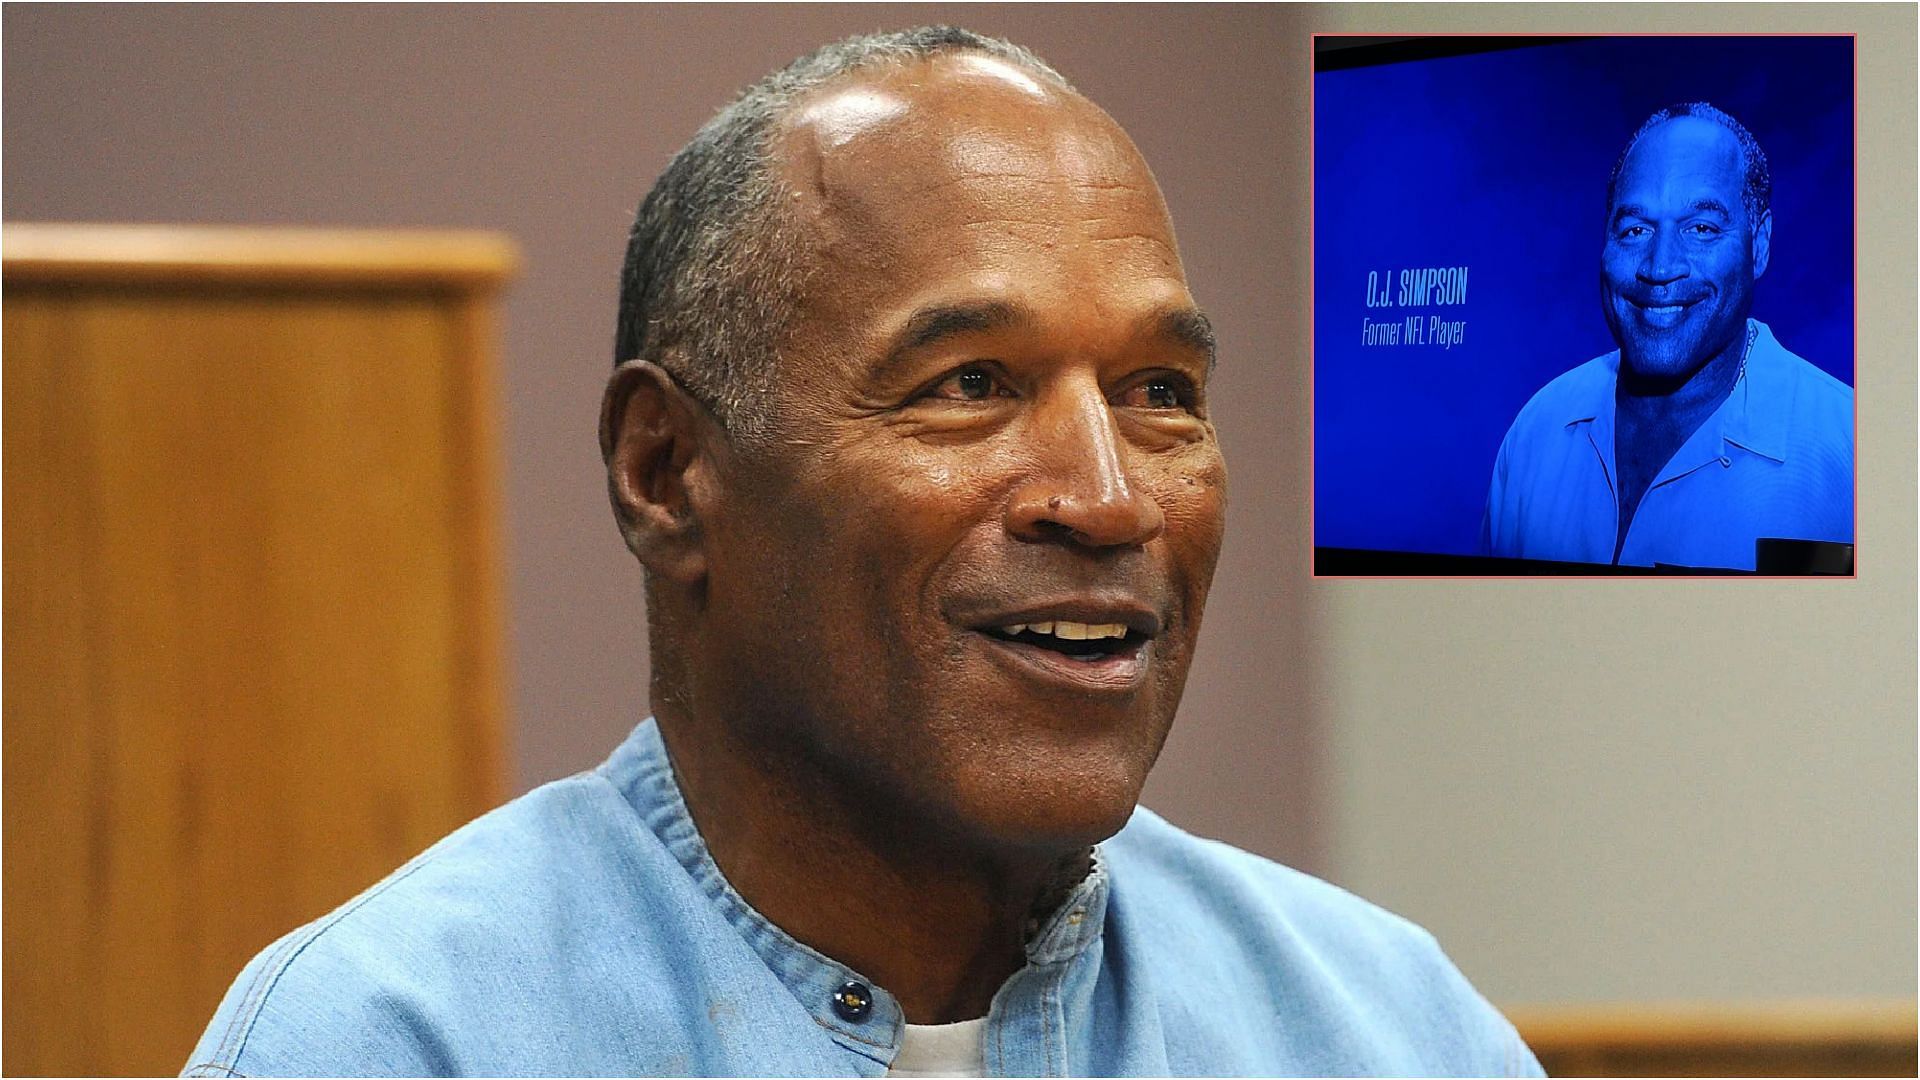 O.J. Simpson gets honored at BET Awards (Award show picture from Jennifer Mascia